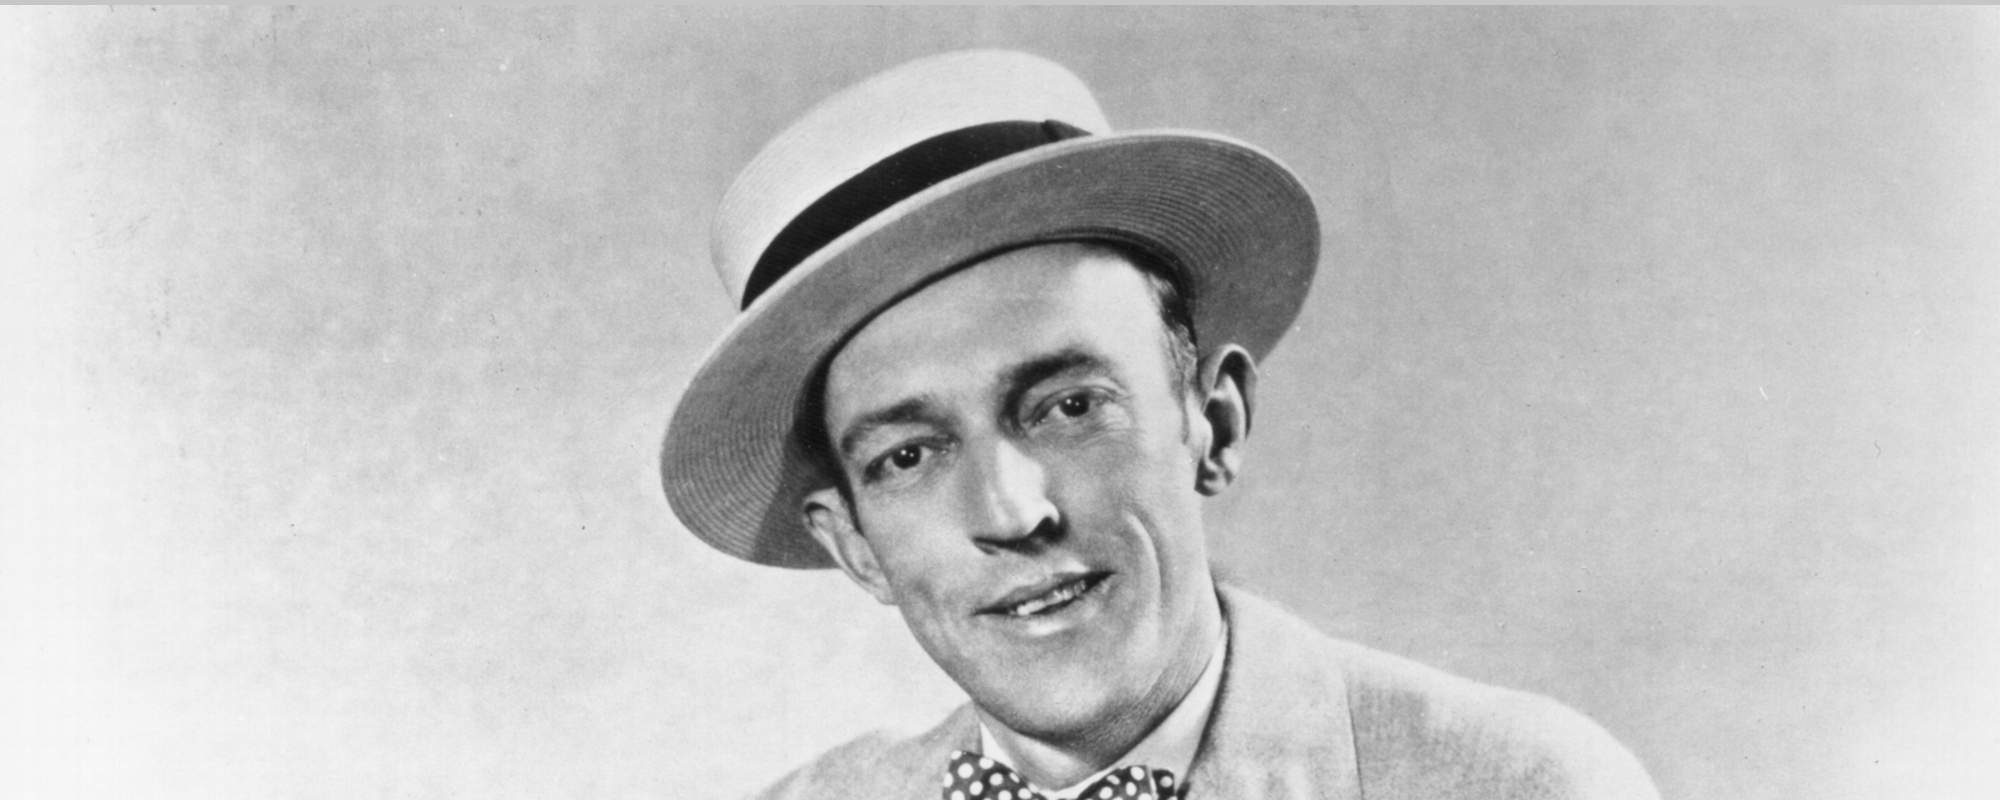 jimmie rodgers (country singer)